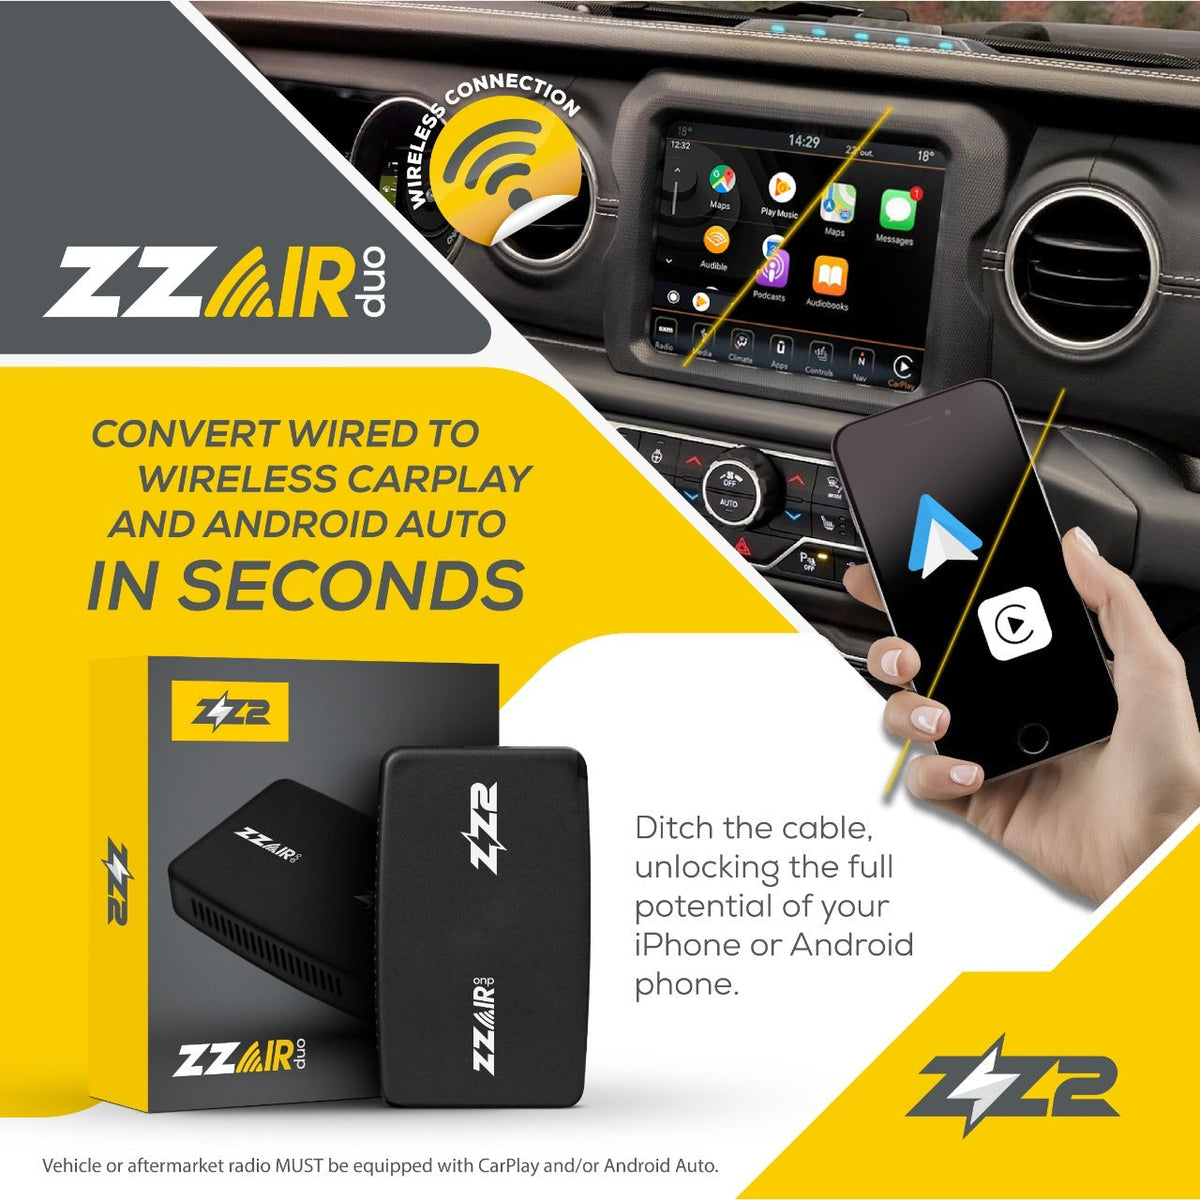 ZZ2 ZZAIR-DUO - converts wired to wireless Android Auto and CarPlay in seconds